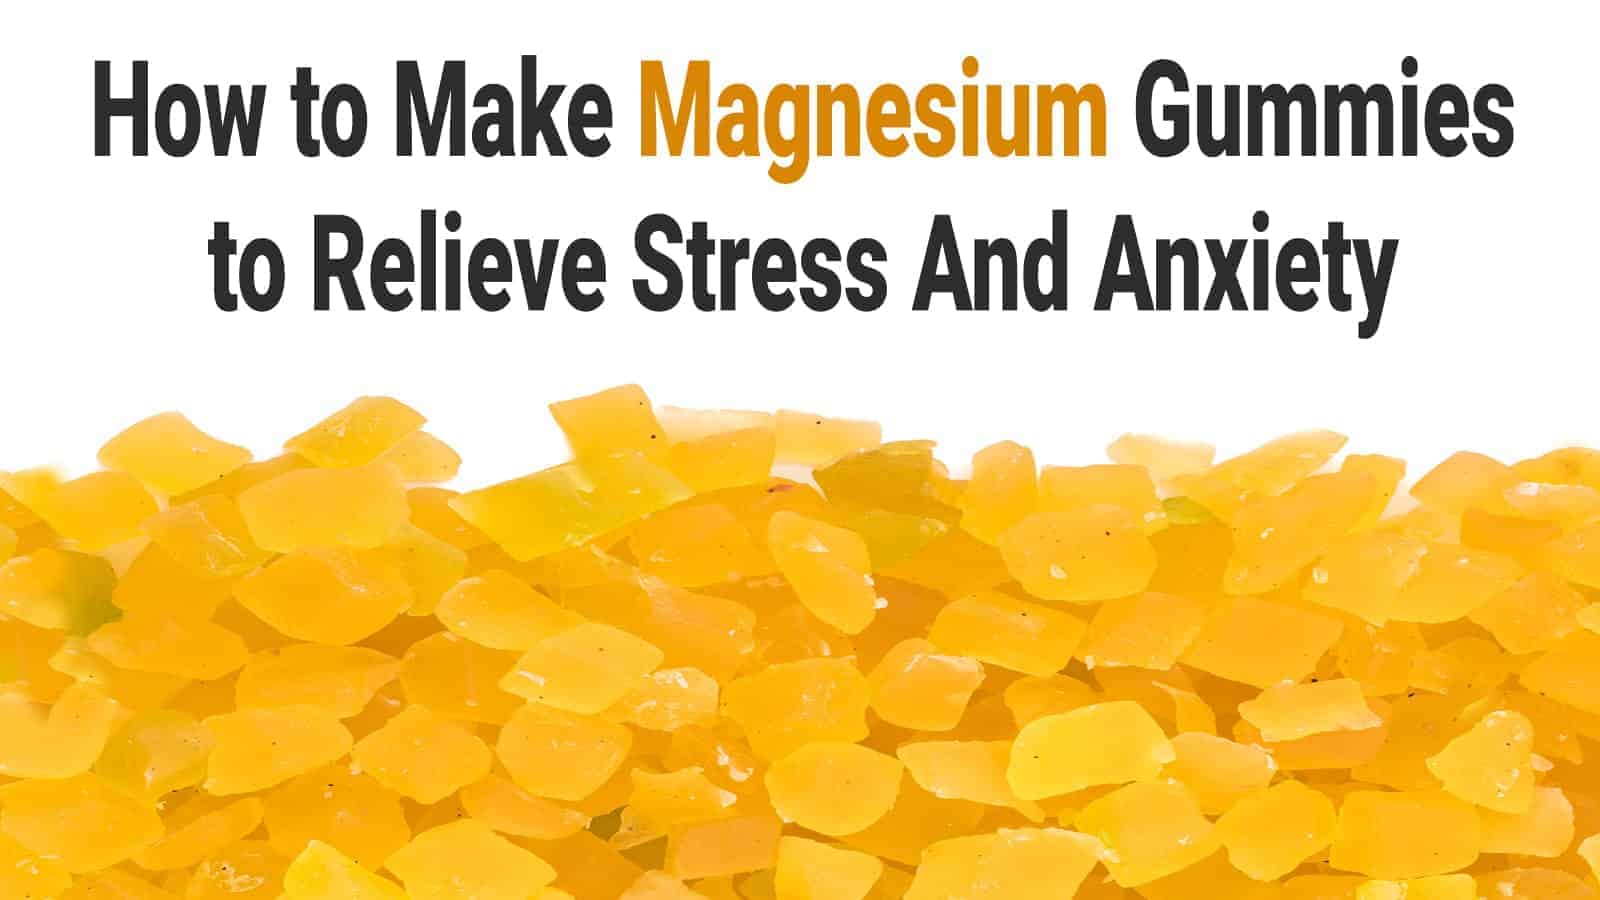 How to Make Magnesium Gummies to Relieve Stress And Anxiety